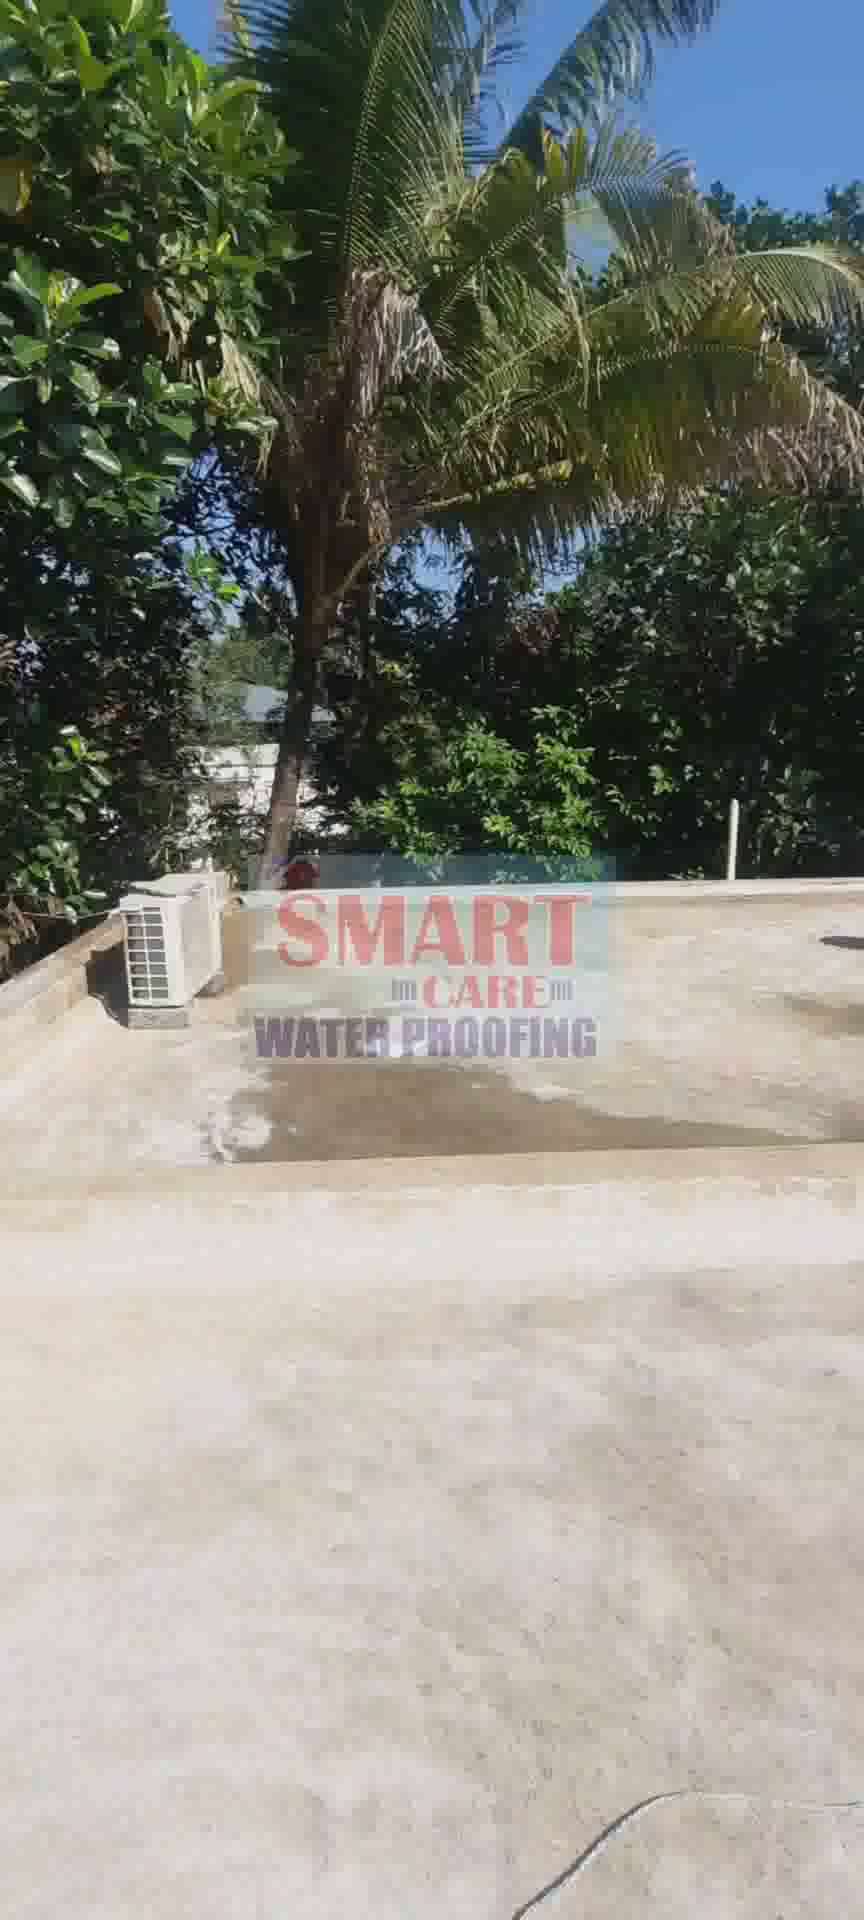 RoofGaurd , waterproofing and cool coating, warranty materials #WaterProofings  #WaterProofing  #WARRANTY  #warrantied  #leakproof  #koloapp  #allkerala  #WaterSafety  #HomeAutomation  #budget  #HouseConstruction  #allkeralapestcontrol  #polyurethane